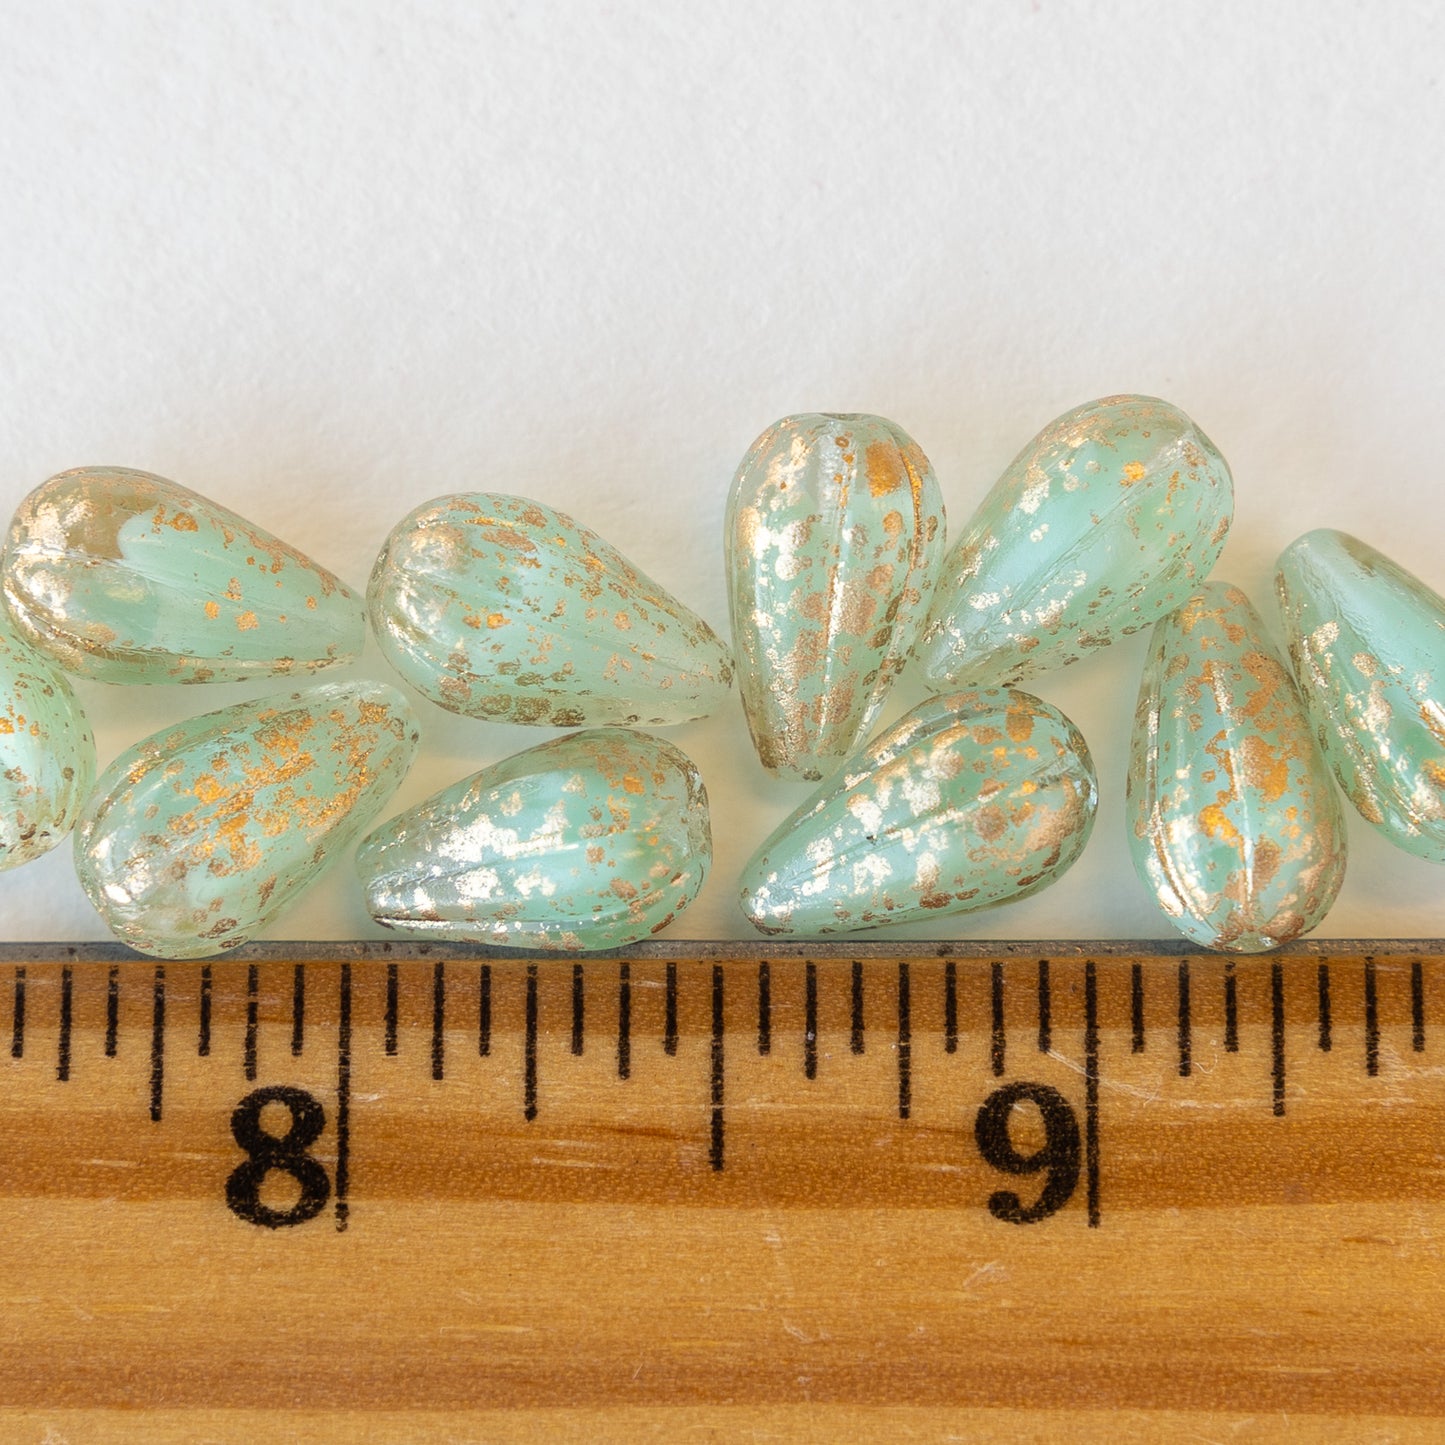 8x13mm Melon Drop - Silky Seafoam Green with Antique Gold Finish - 10 Beads